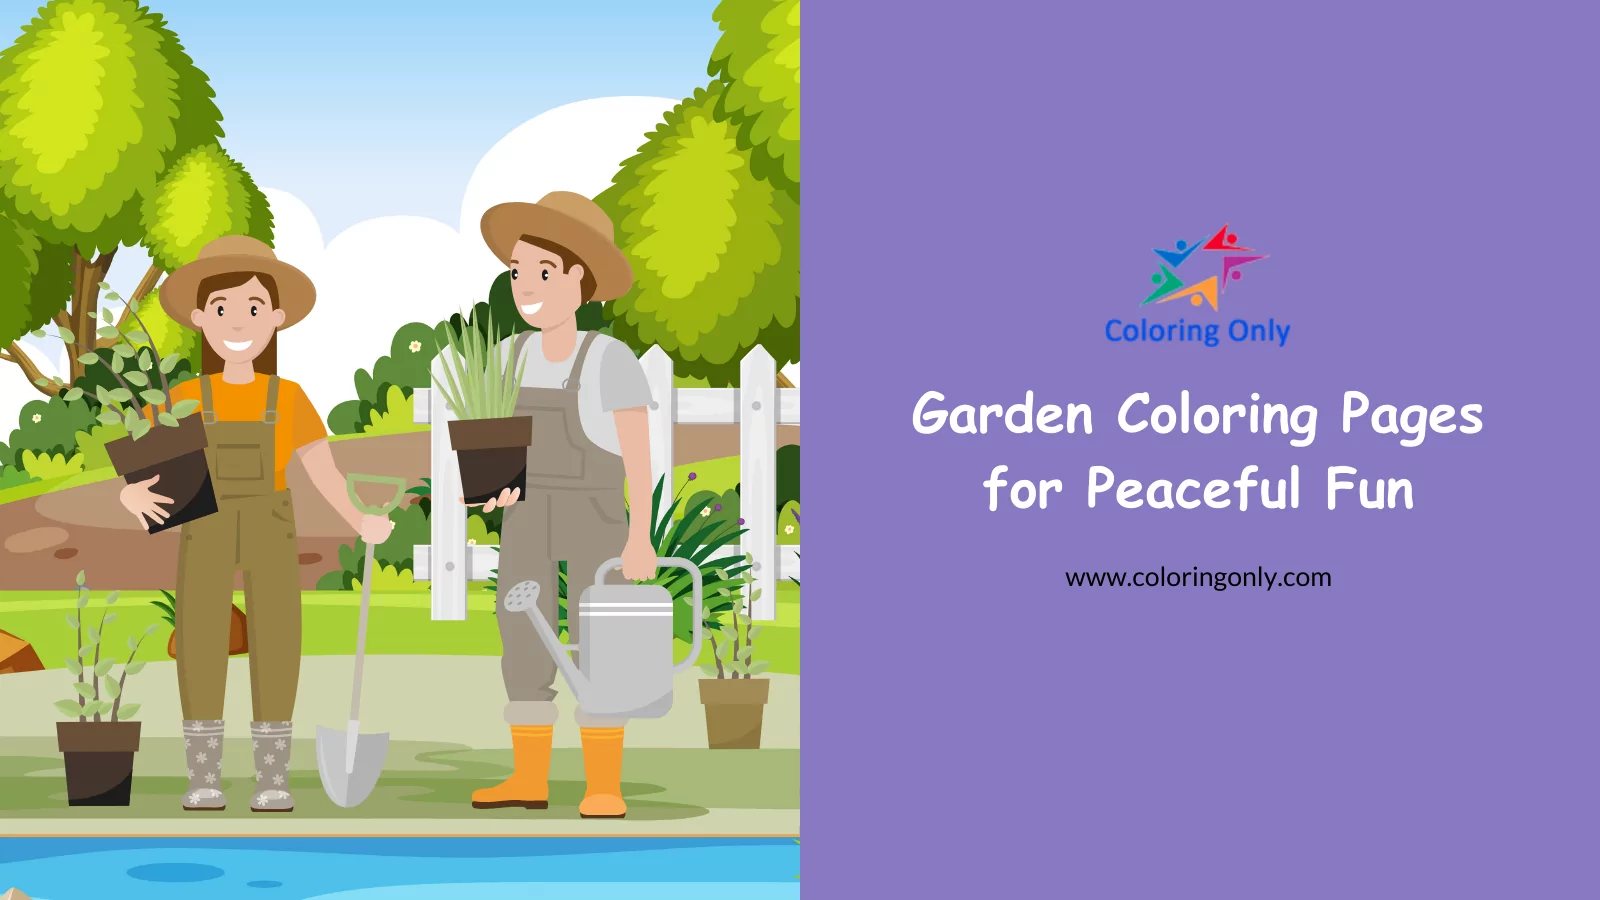 Garden Coloring Pages for Peaceful Fun